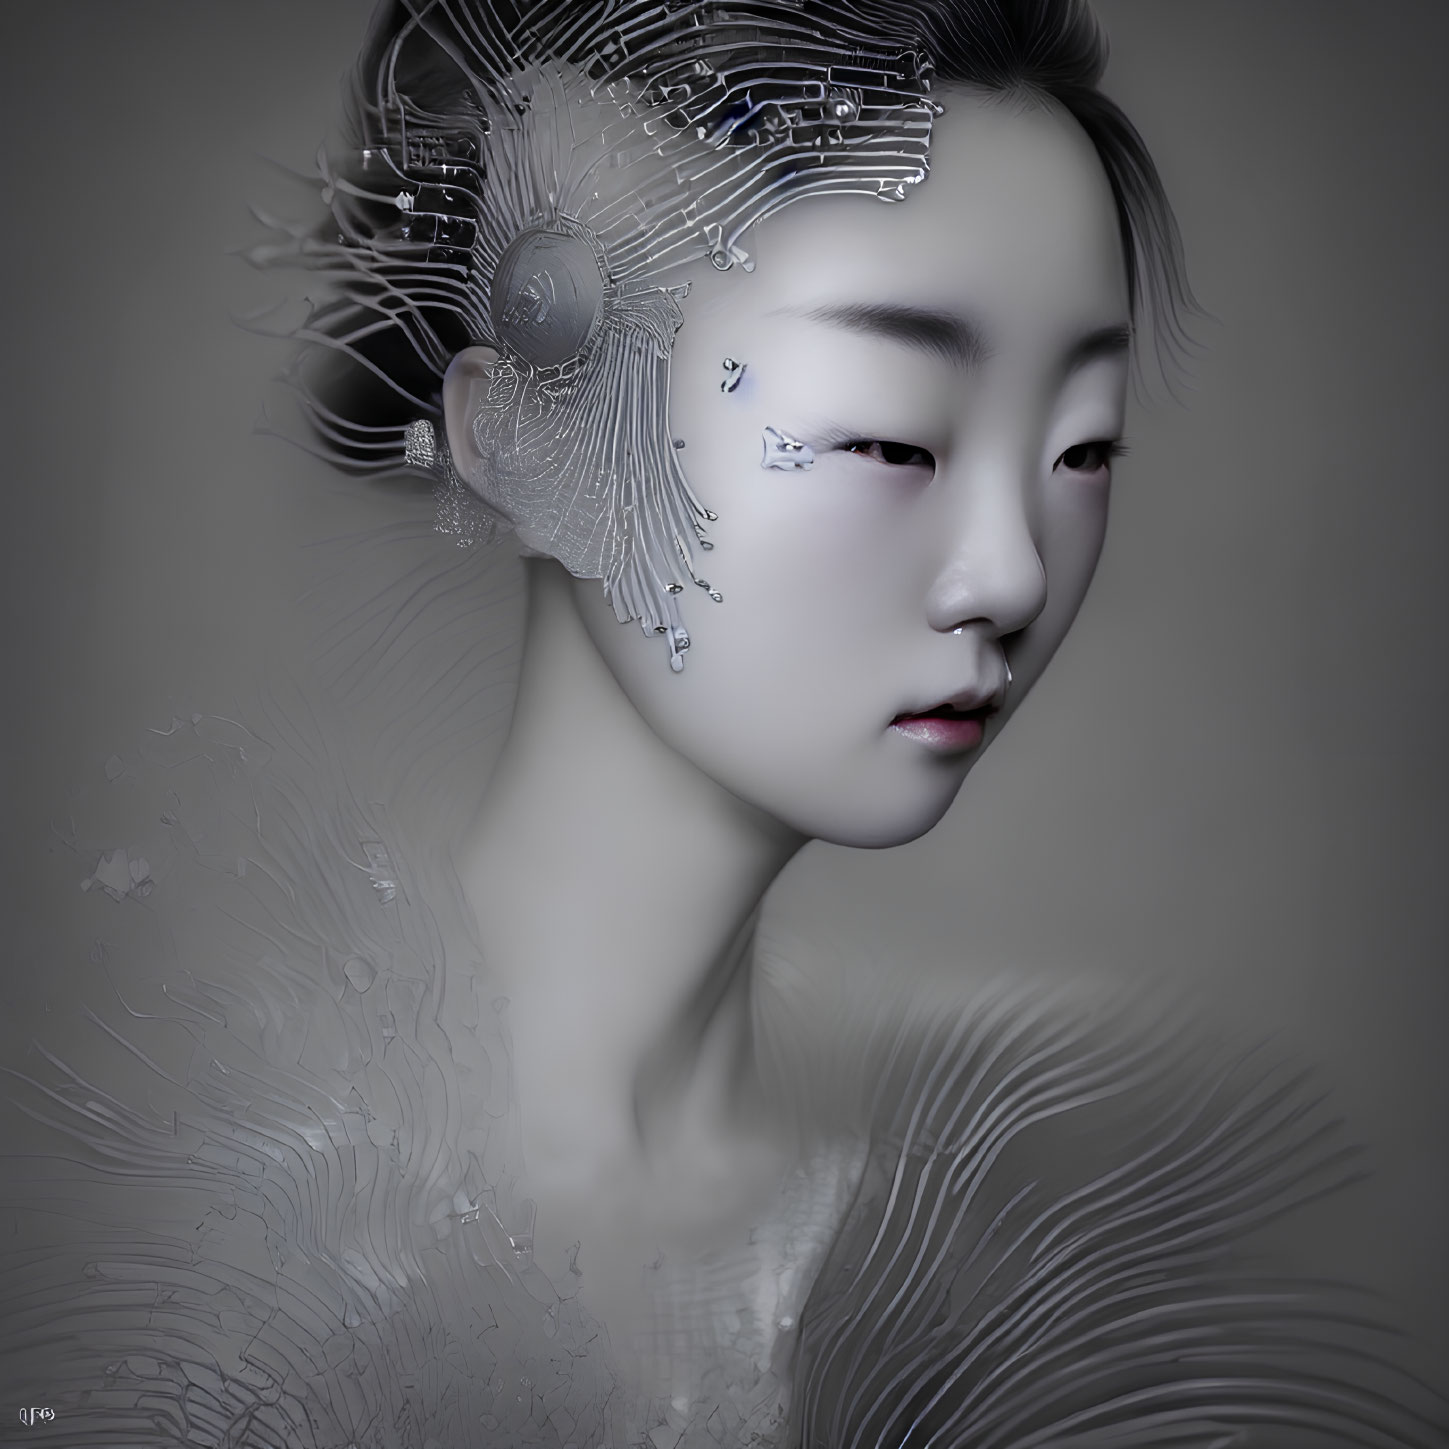 Monochrome digital art: person with futuristic headset and intricate skin patterns